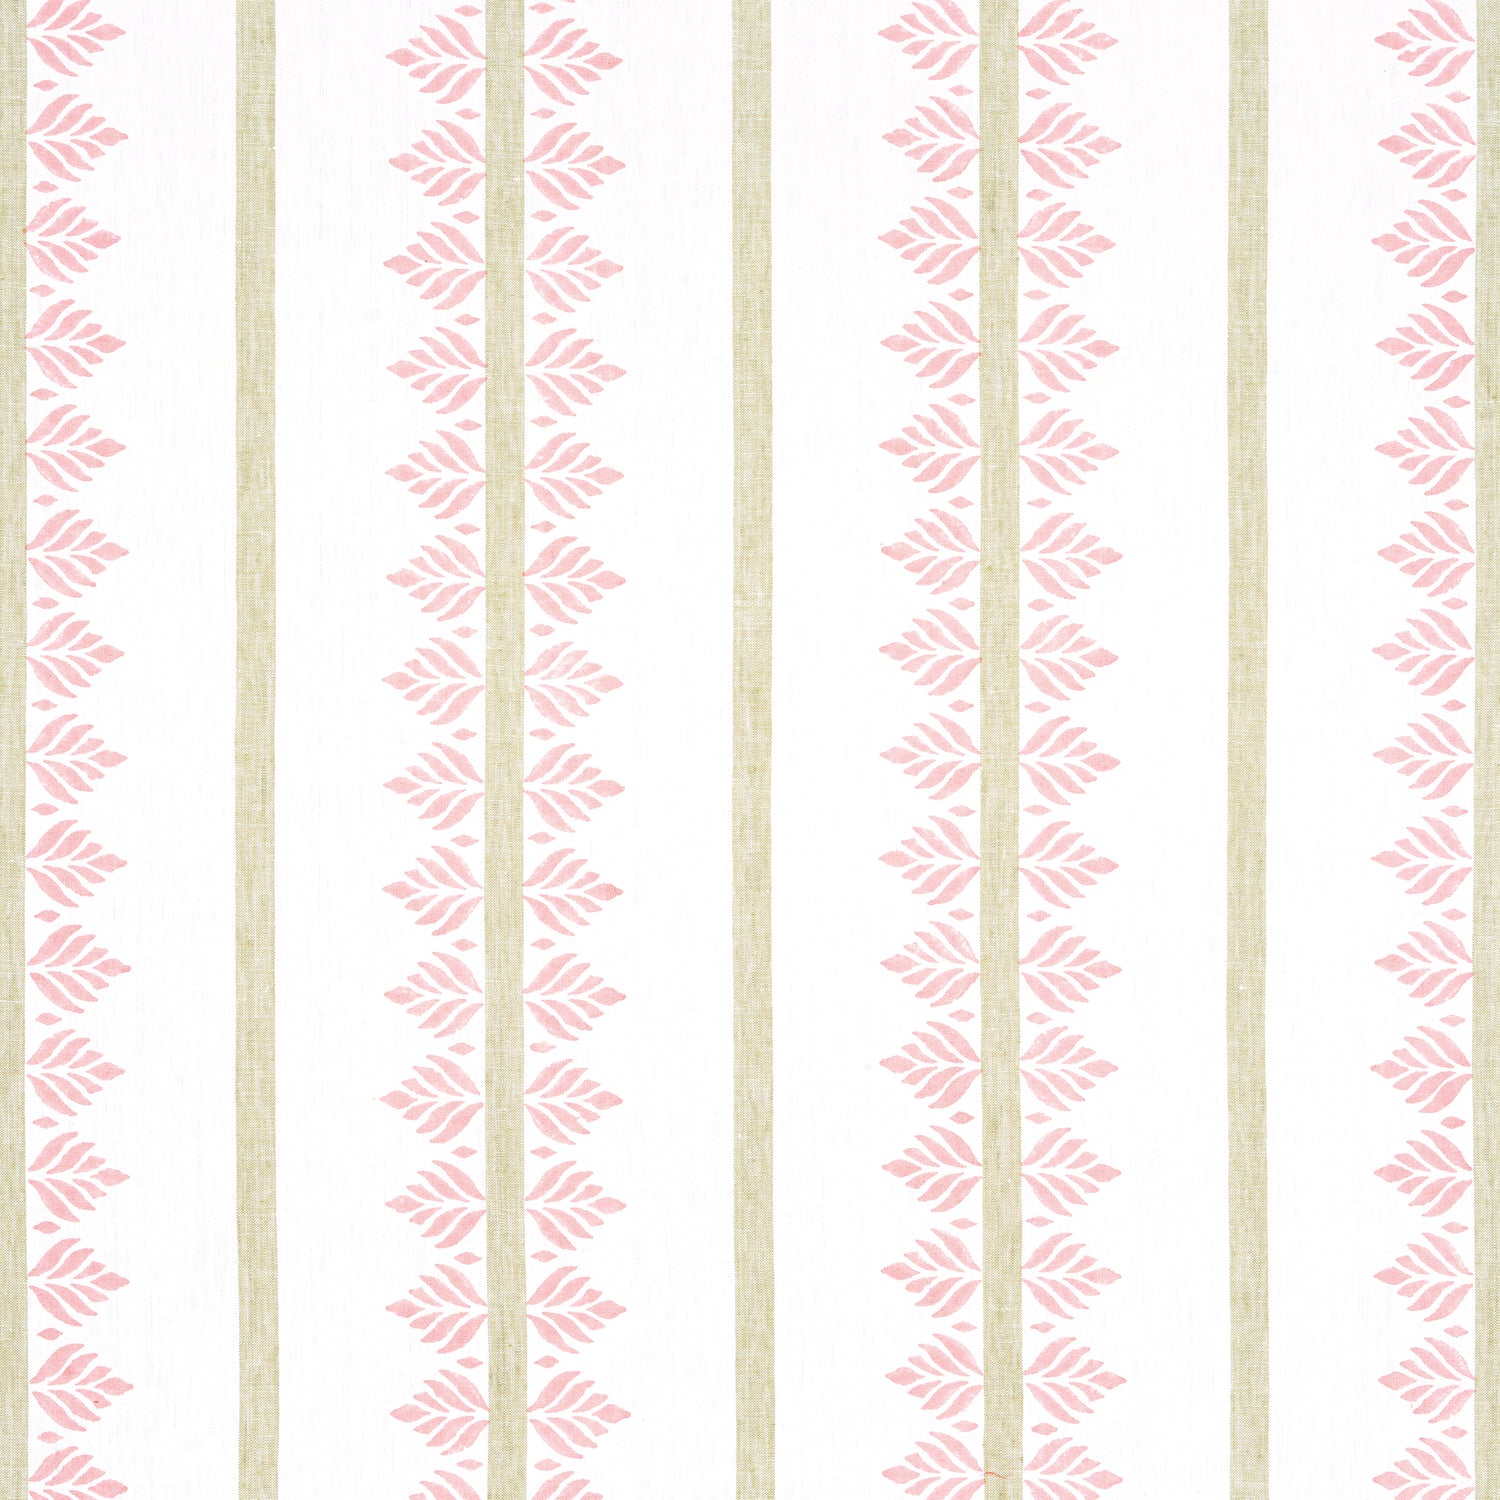 Fern Stripe fabric in Blush color - pattern number AF15100 - by Anna French in the Antilles collection